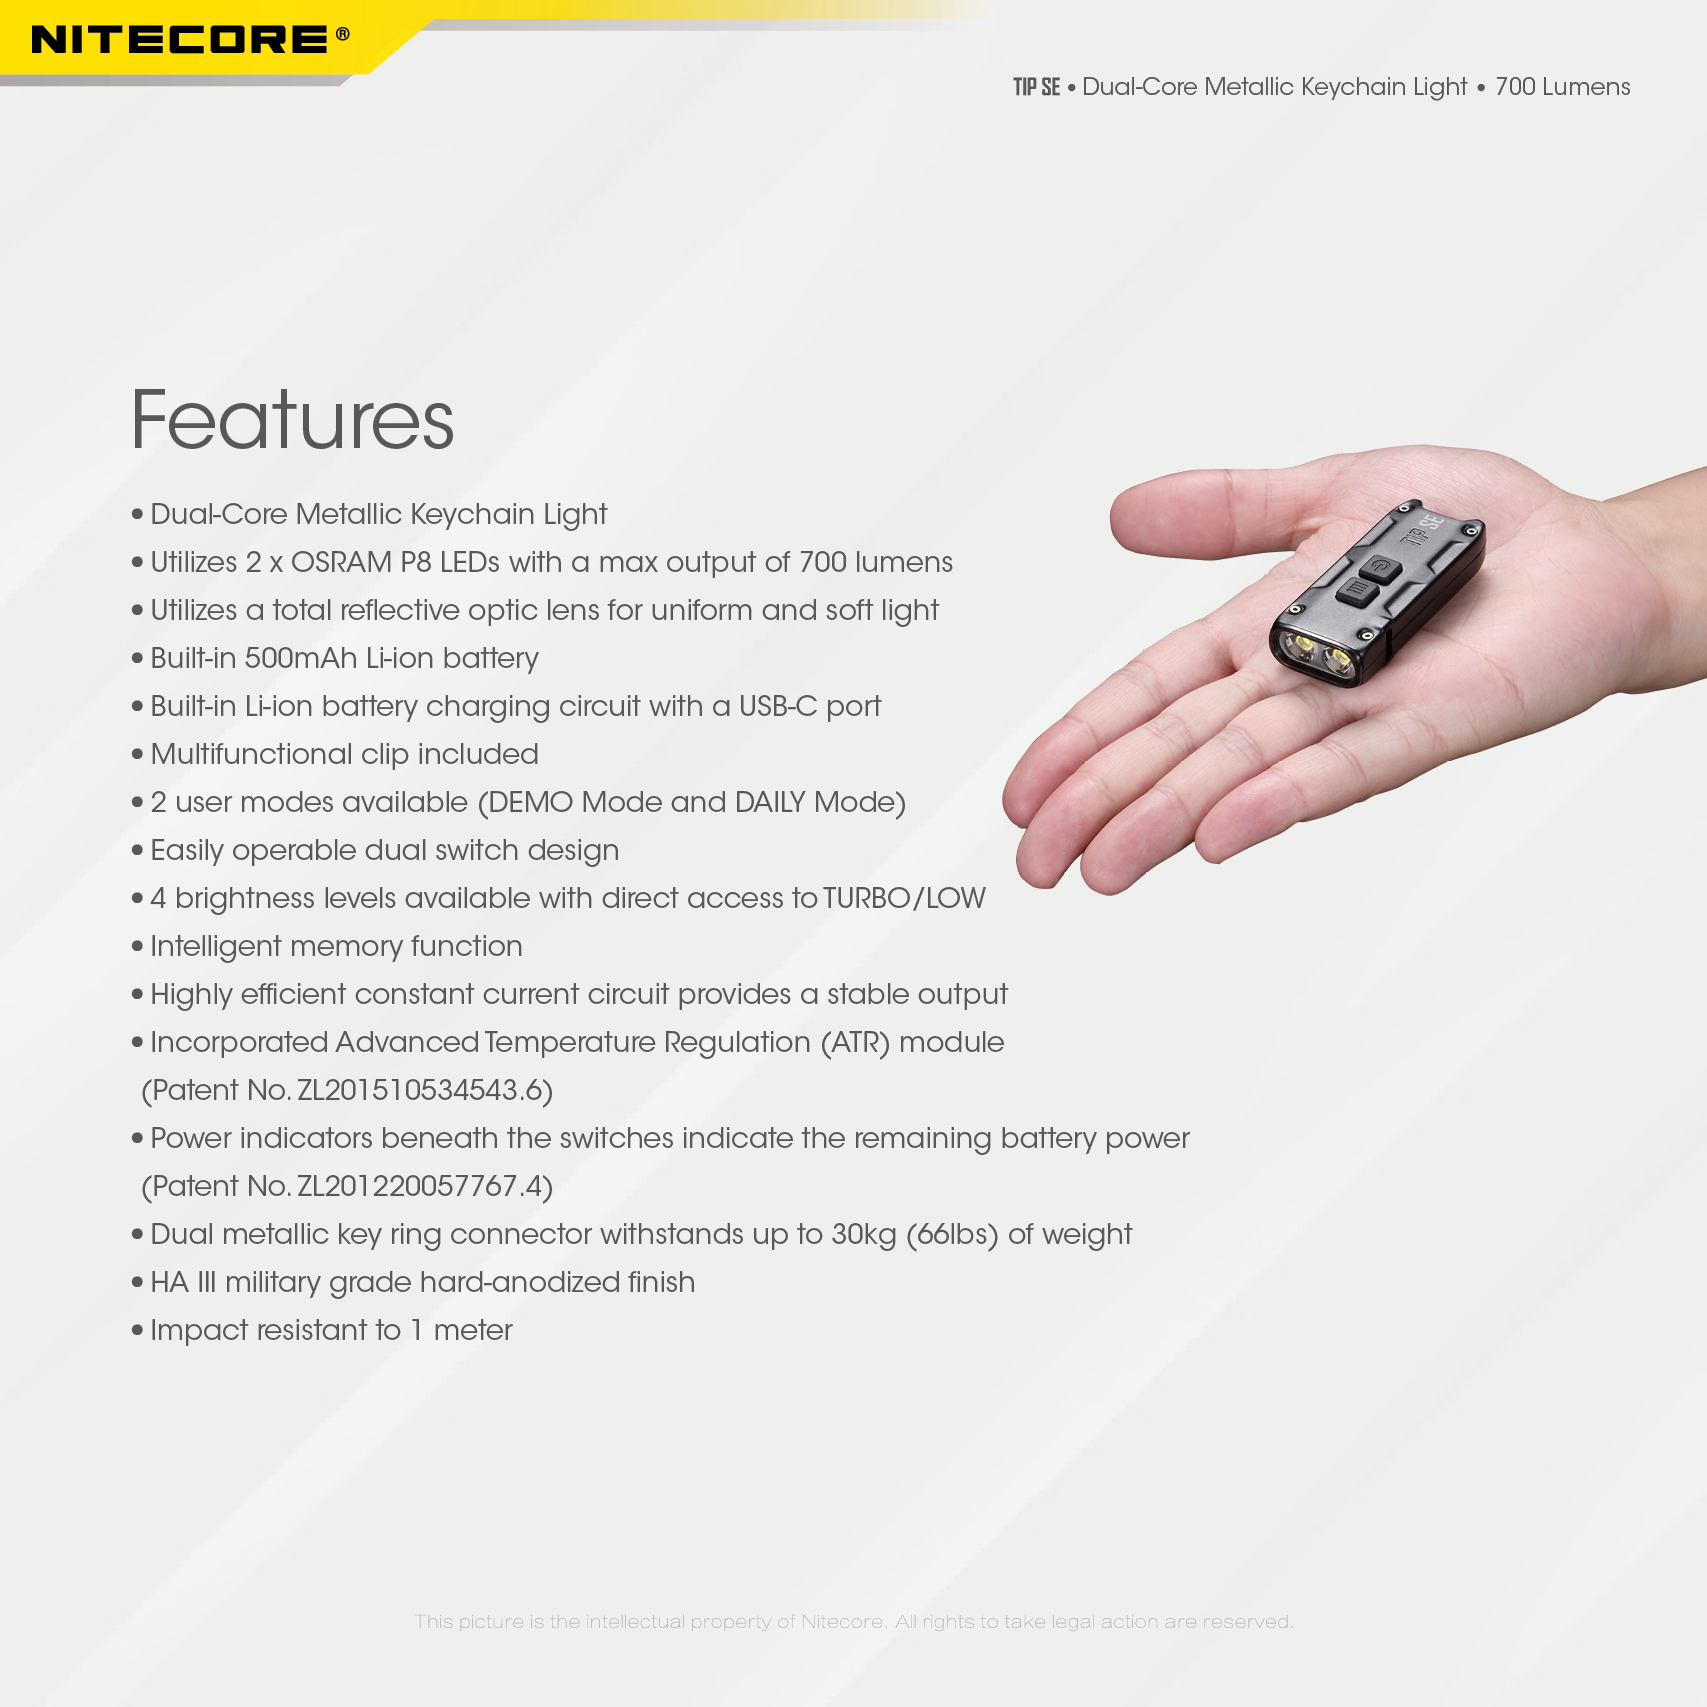 NITECORE-TIP-SE-700LM-P8-Dual-Light-LED-Keychain-Flashlight-Type-C-Rechargeable-QC-Every-Day-Carry-M-1976045-21